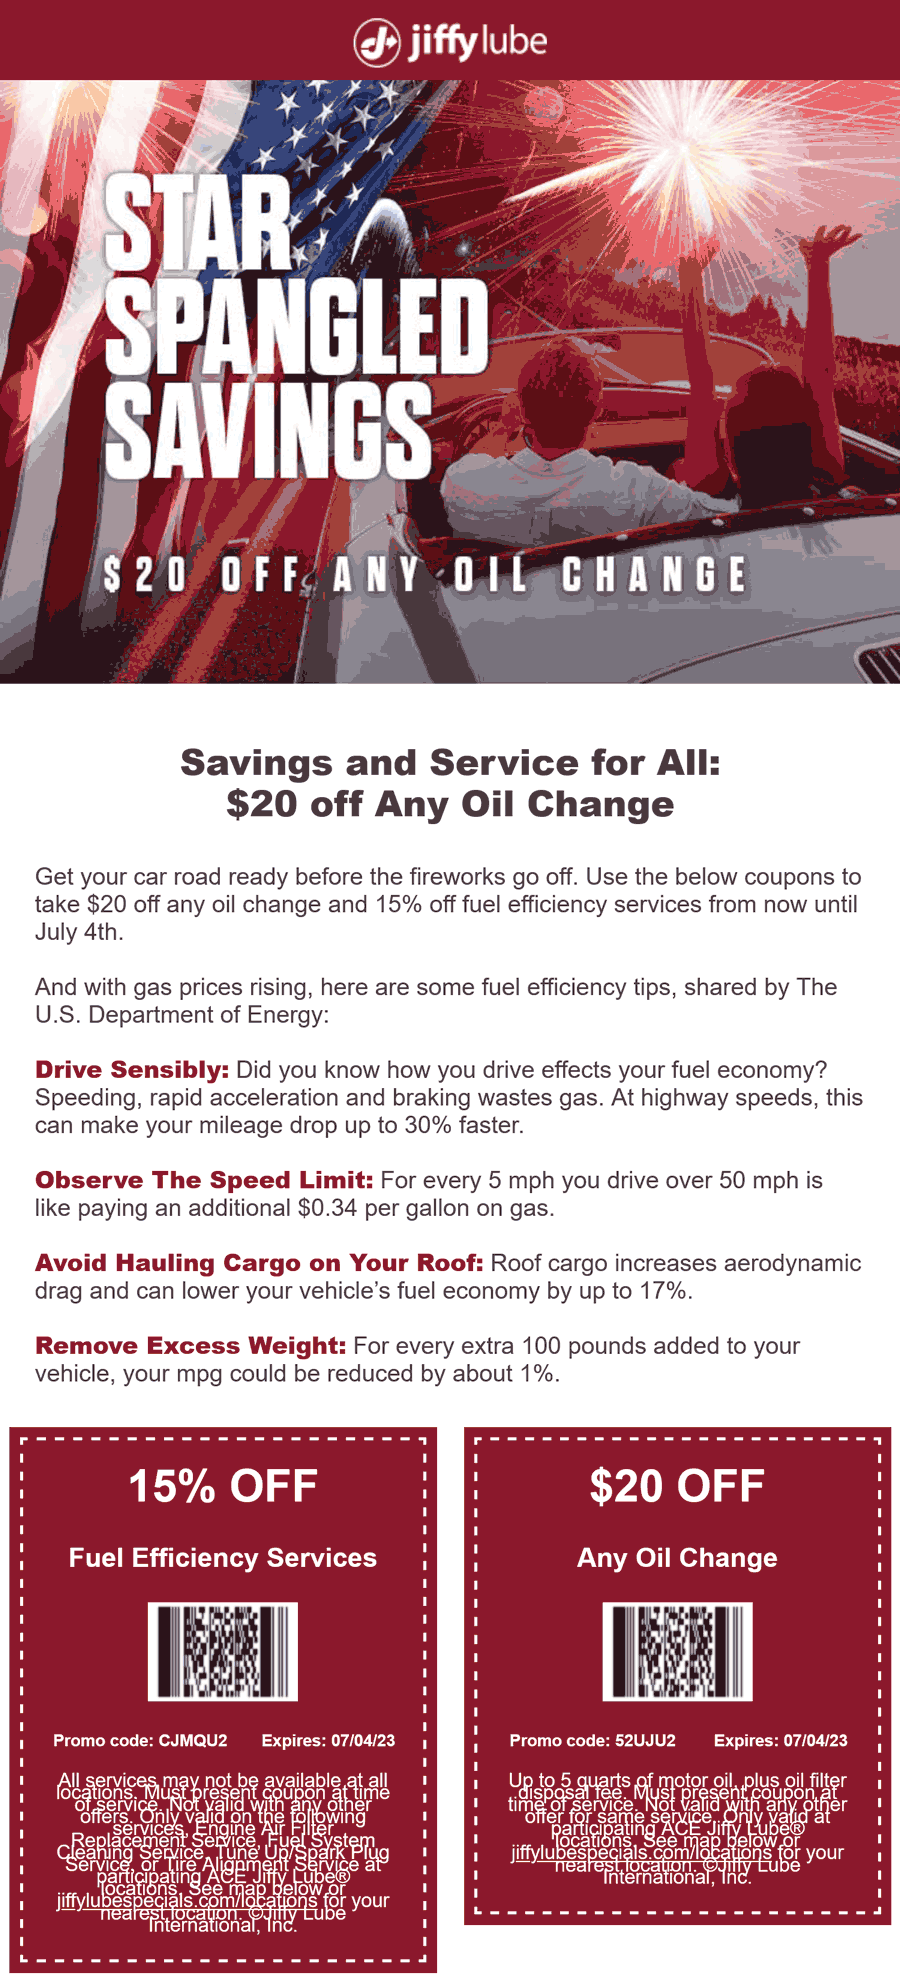 Jiffy Lube stores Coupon  $20 off any oll change at Jiffy Lube #jiffylube 